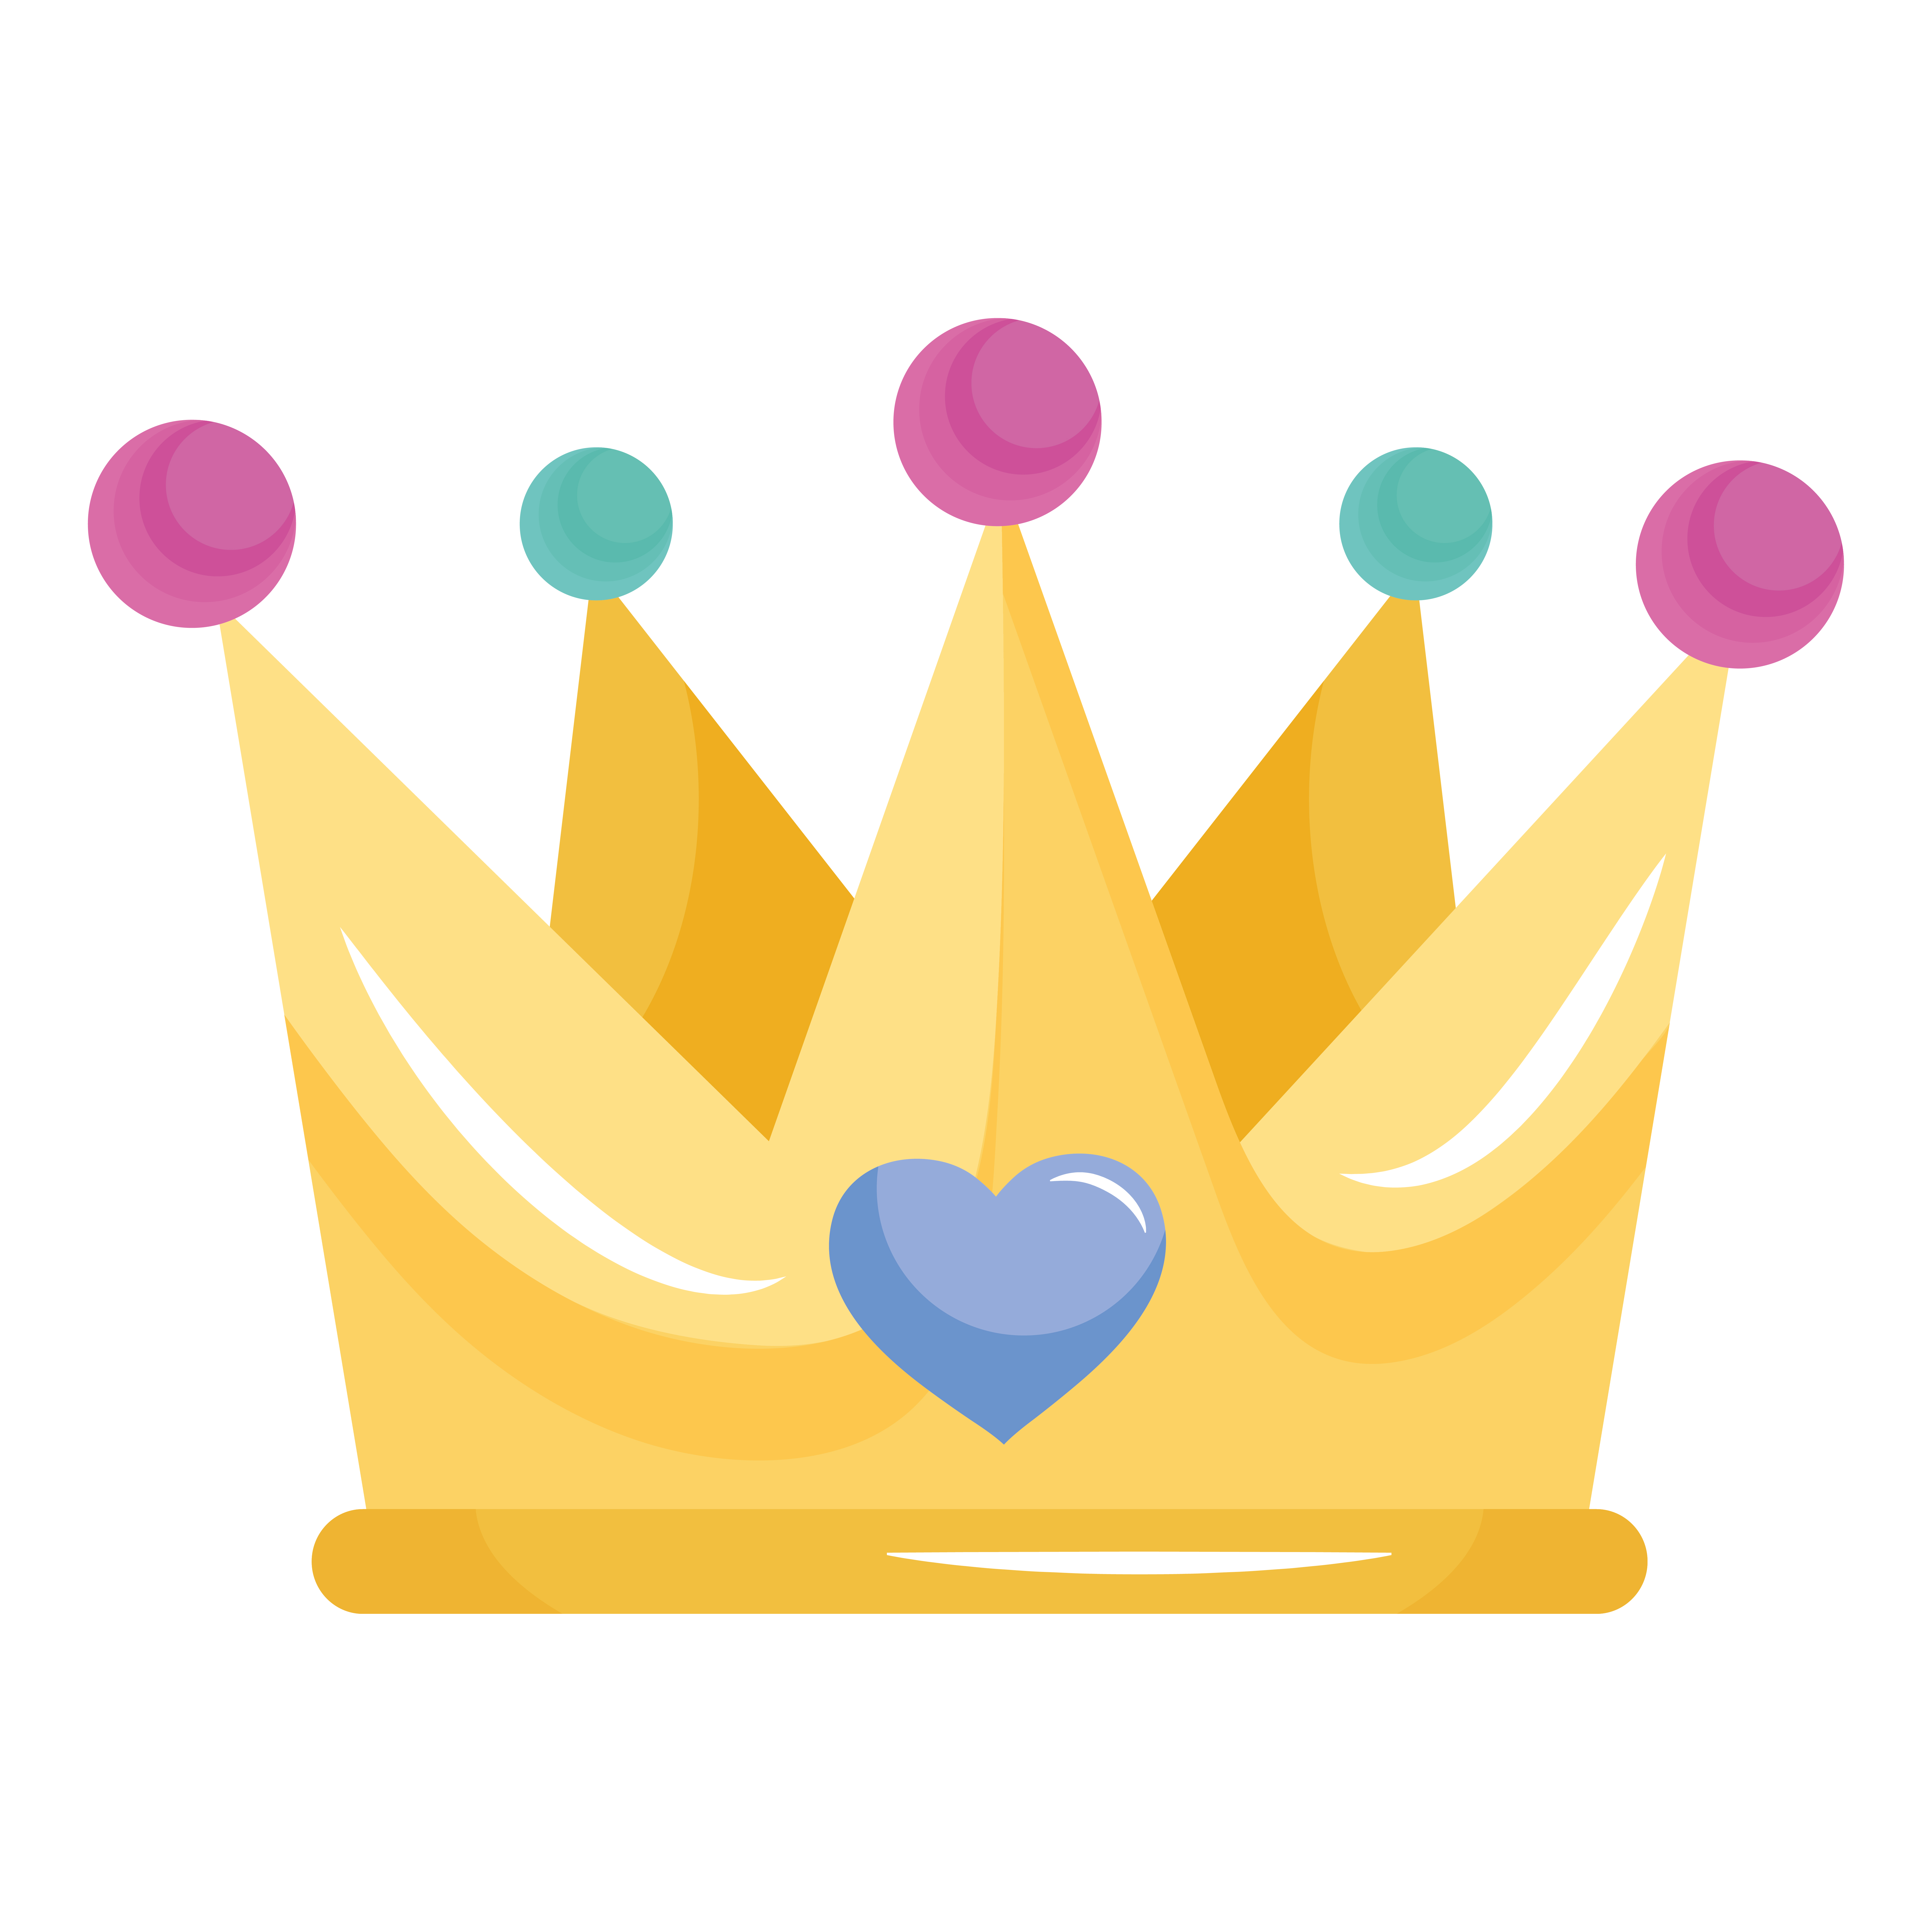 Cute Queen Crown With Heart Icon Download Free Vectors Clipart Graphics Vector Art